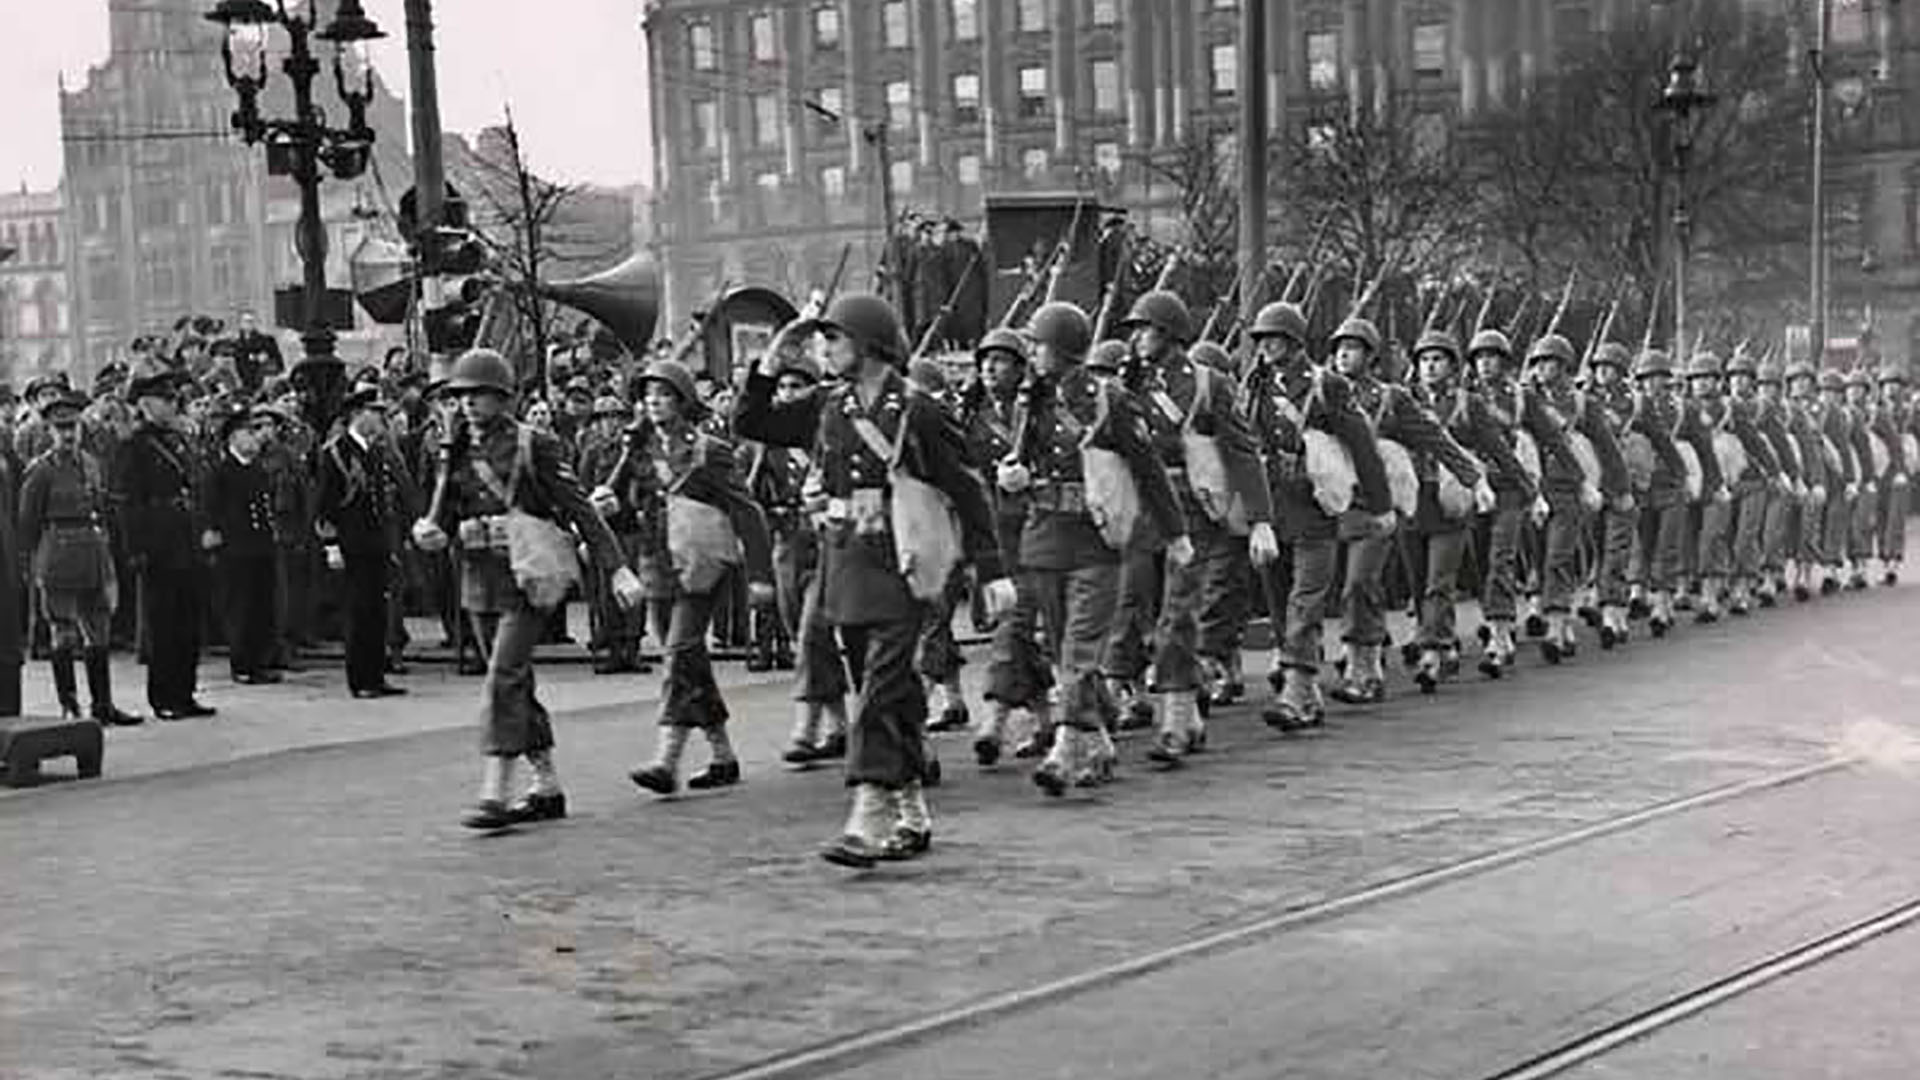 US Army in Belfast, Co. Antrim